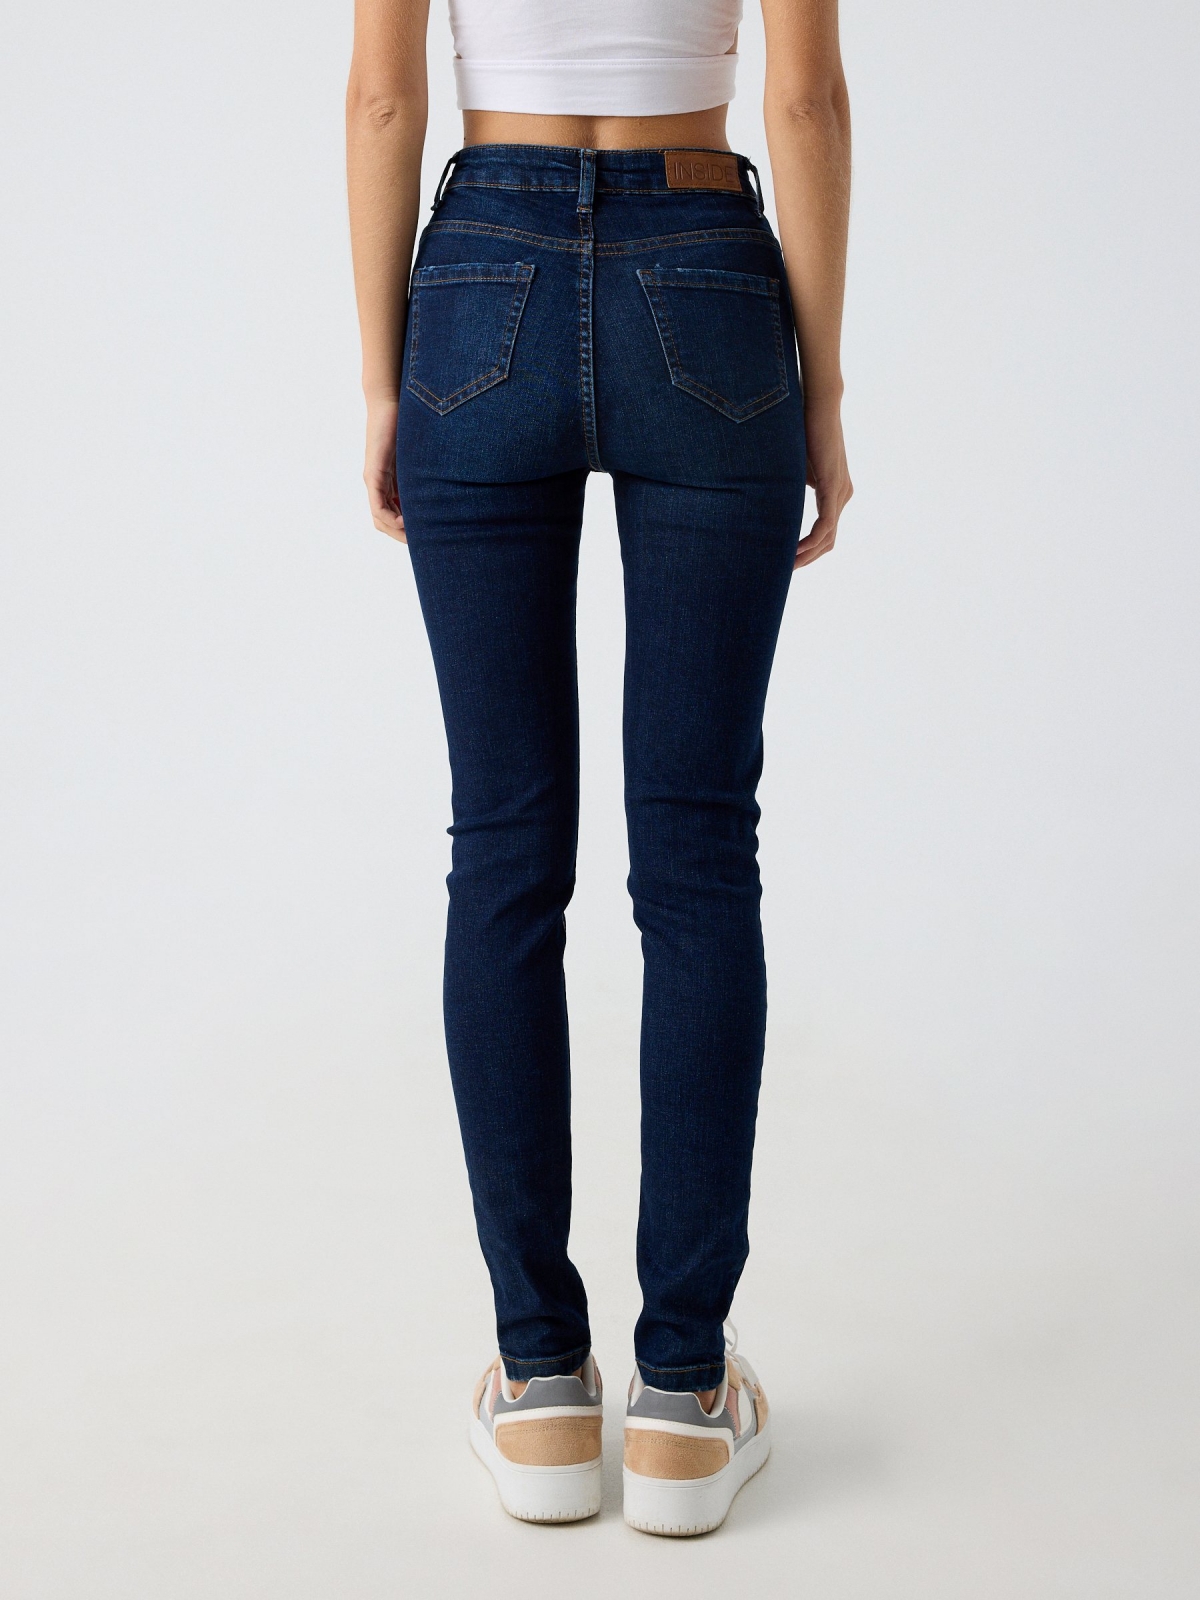 Blue high waisted skinny jeans blue middle back view